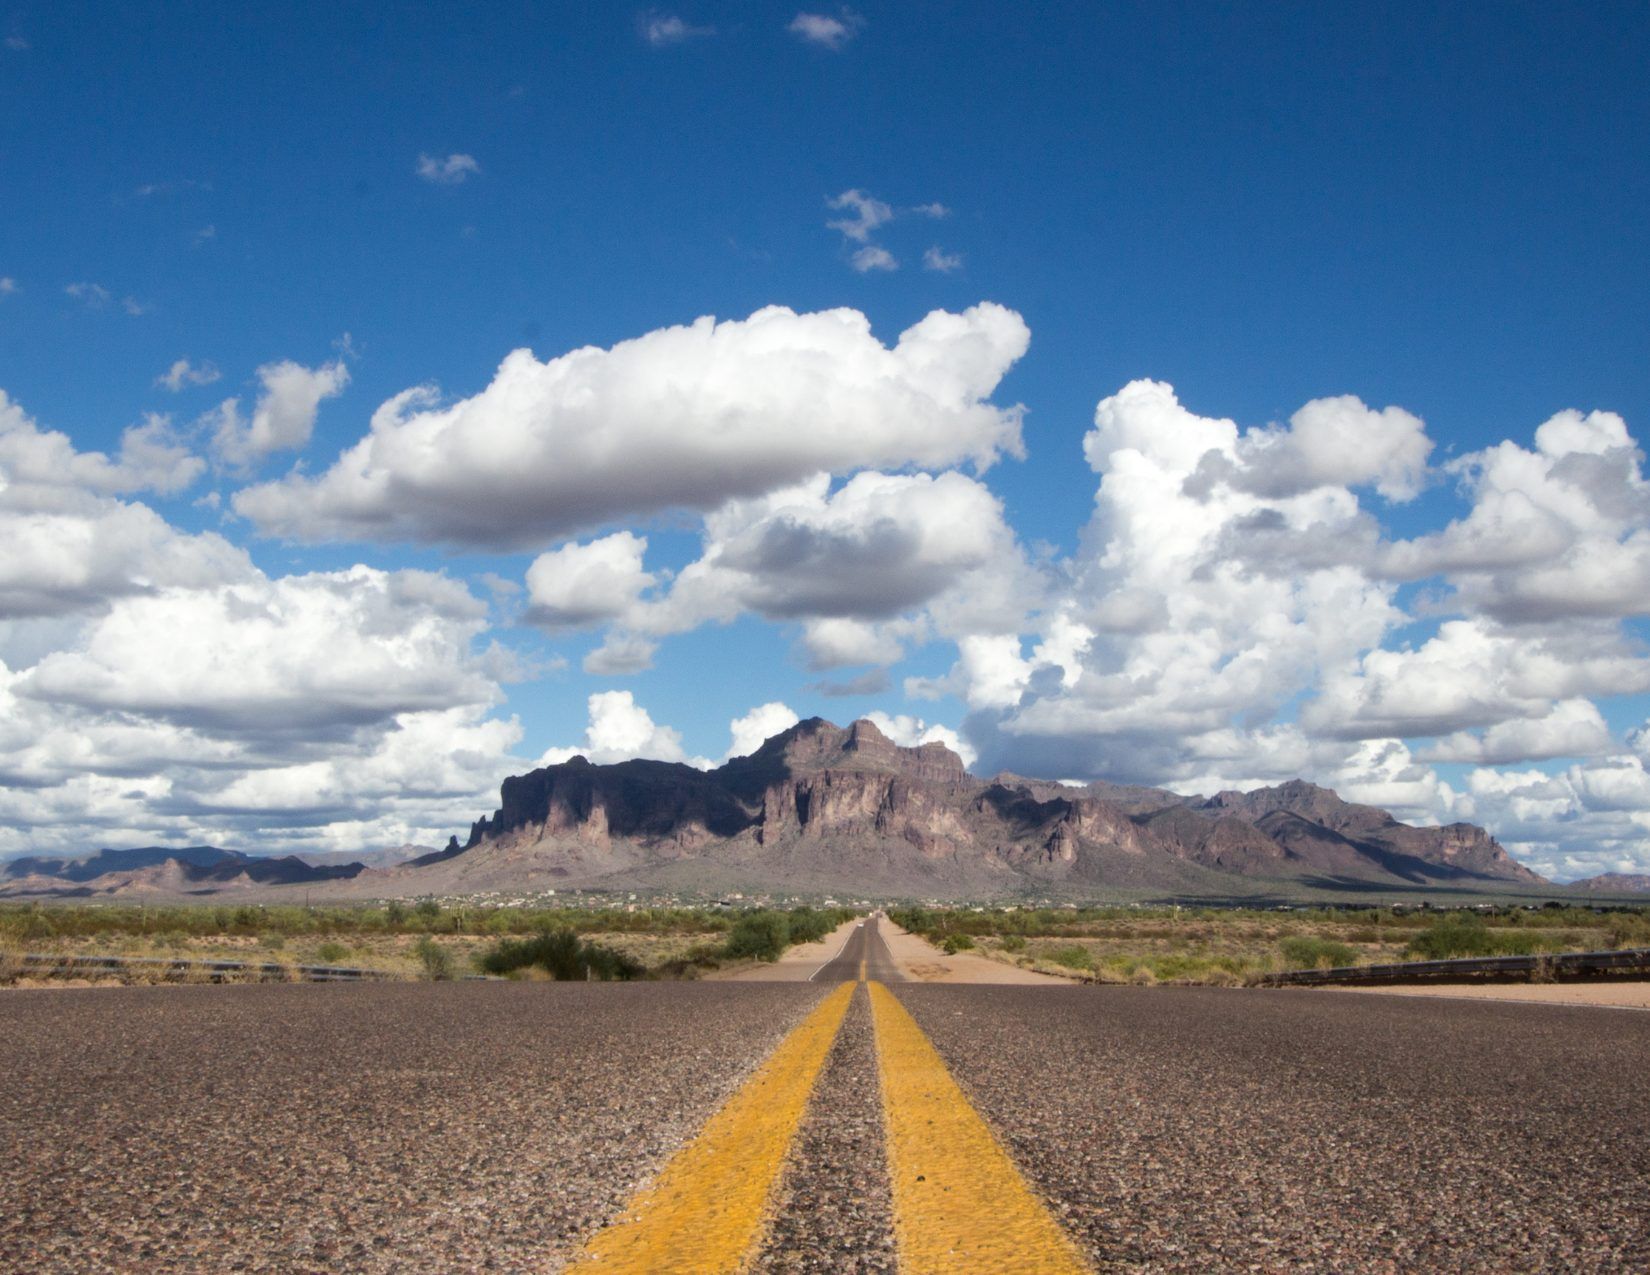 Desert road with superstition mountains in the background and white clouds in the blue sky